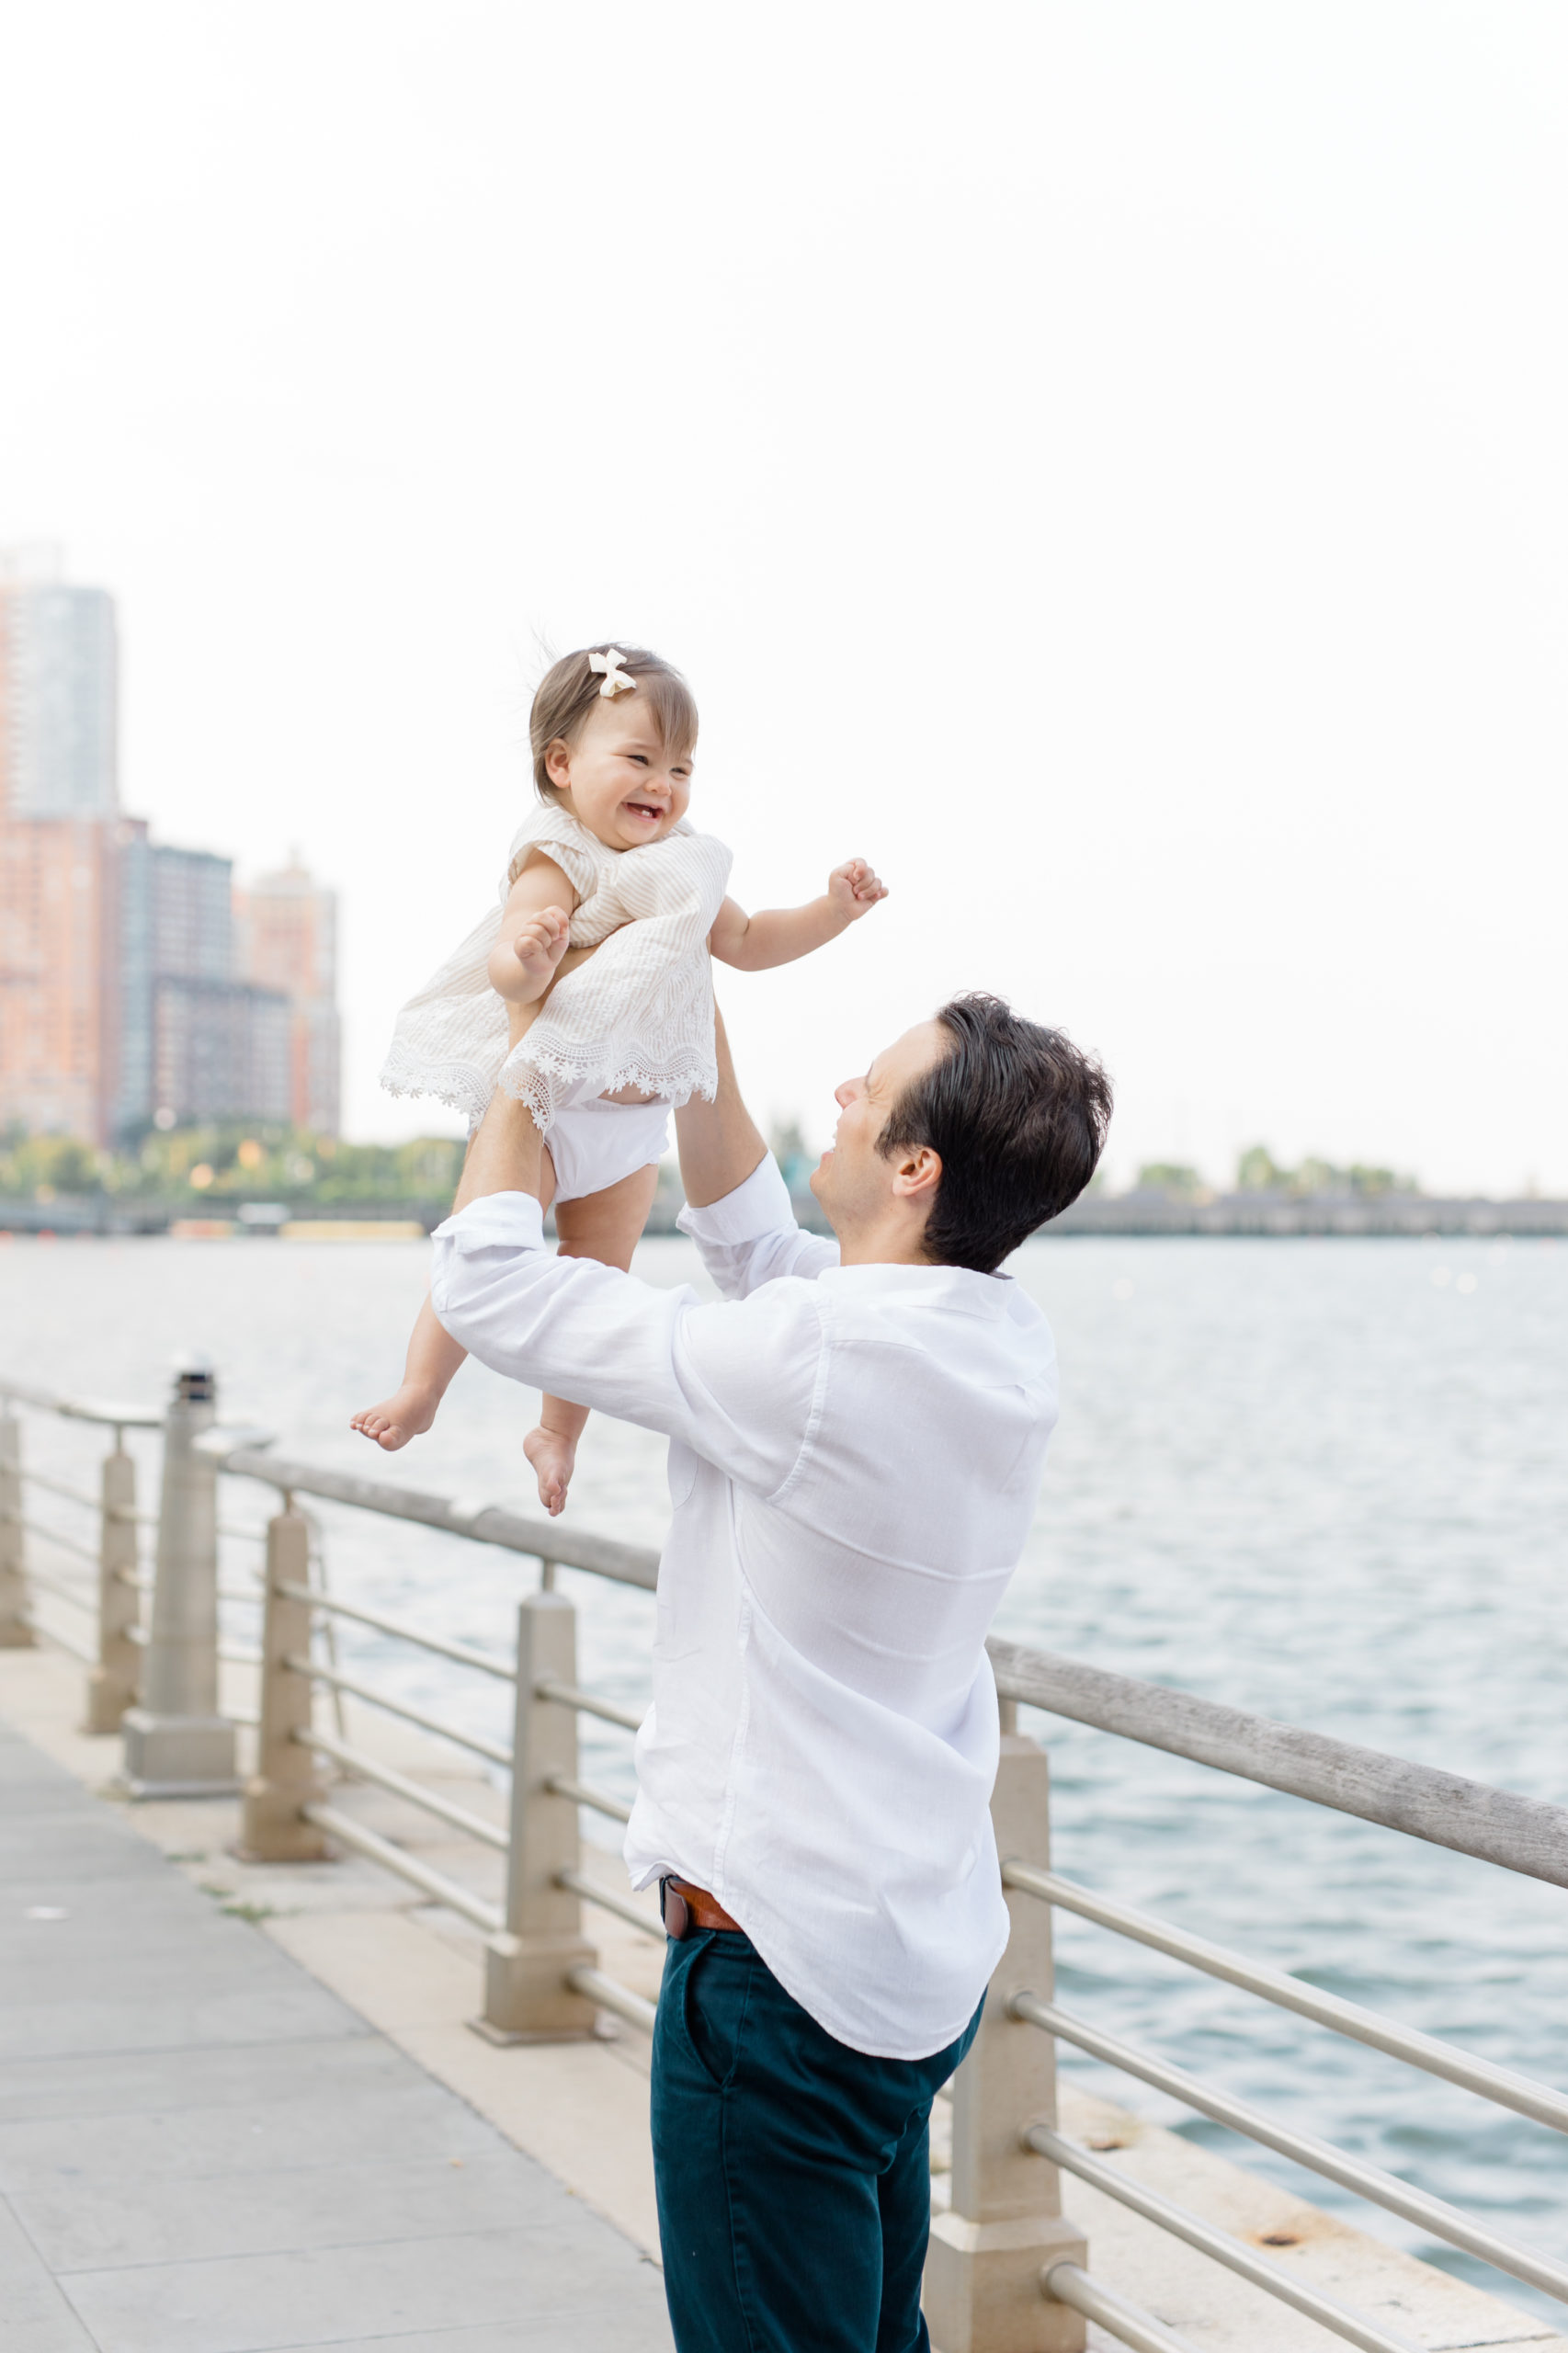 A New York City family photography session on Hudson River Greenway, by Jacqueline Clair Photography